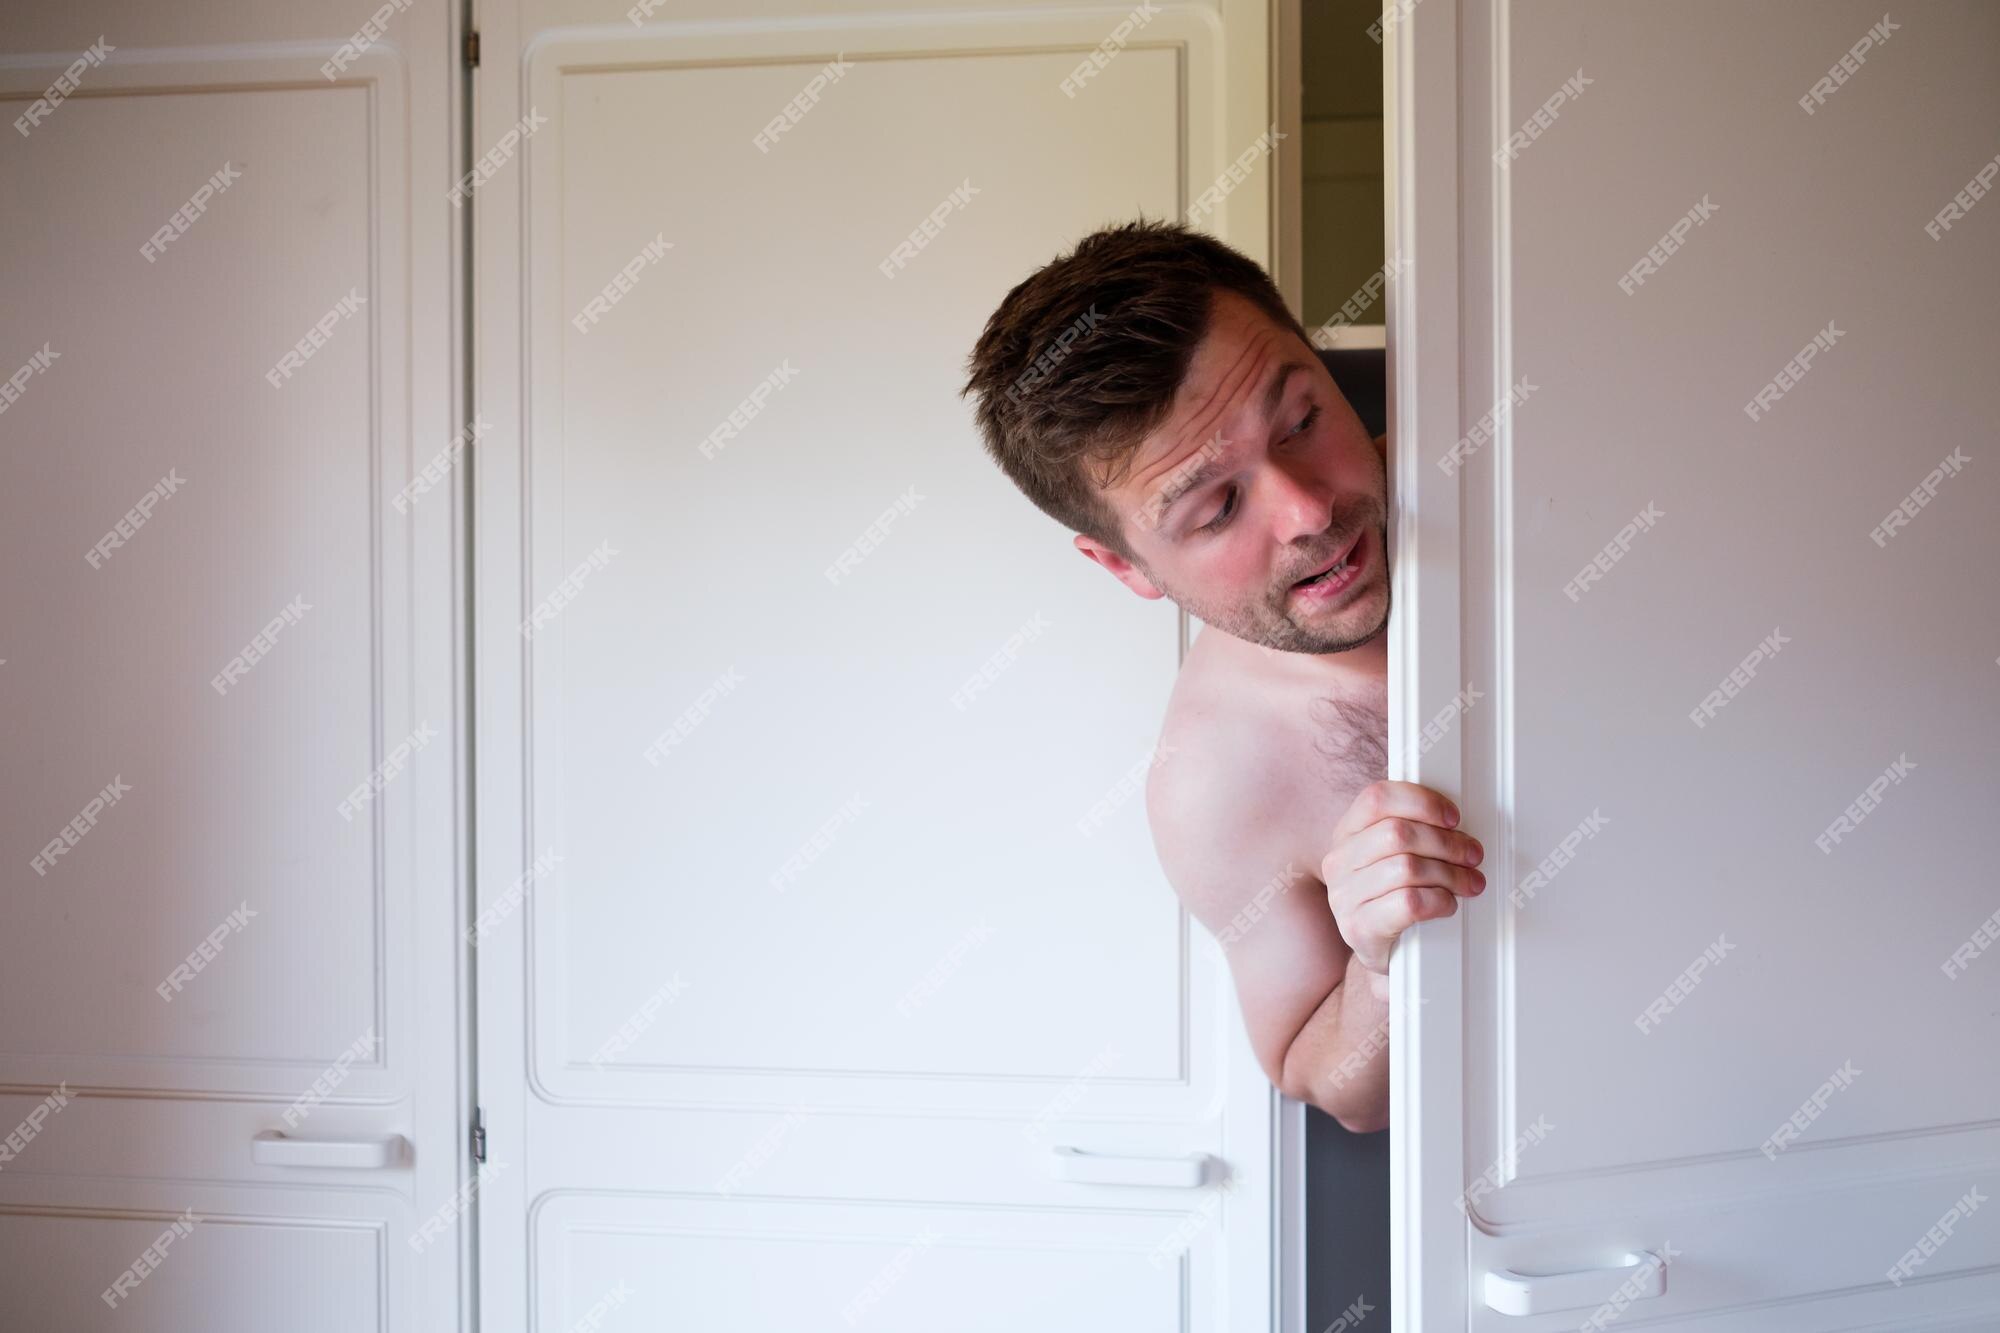 daniel ducommun recommends naked at the door pic